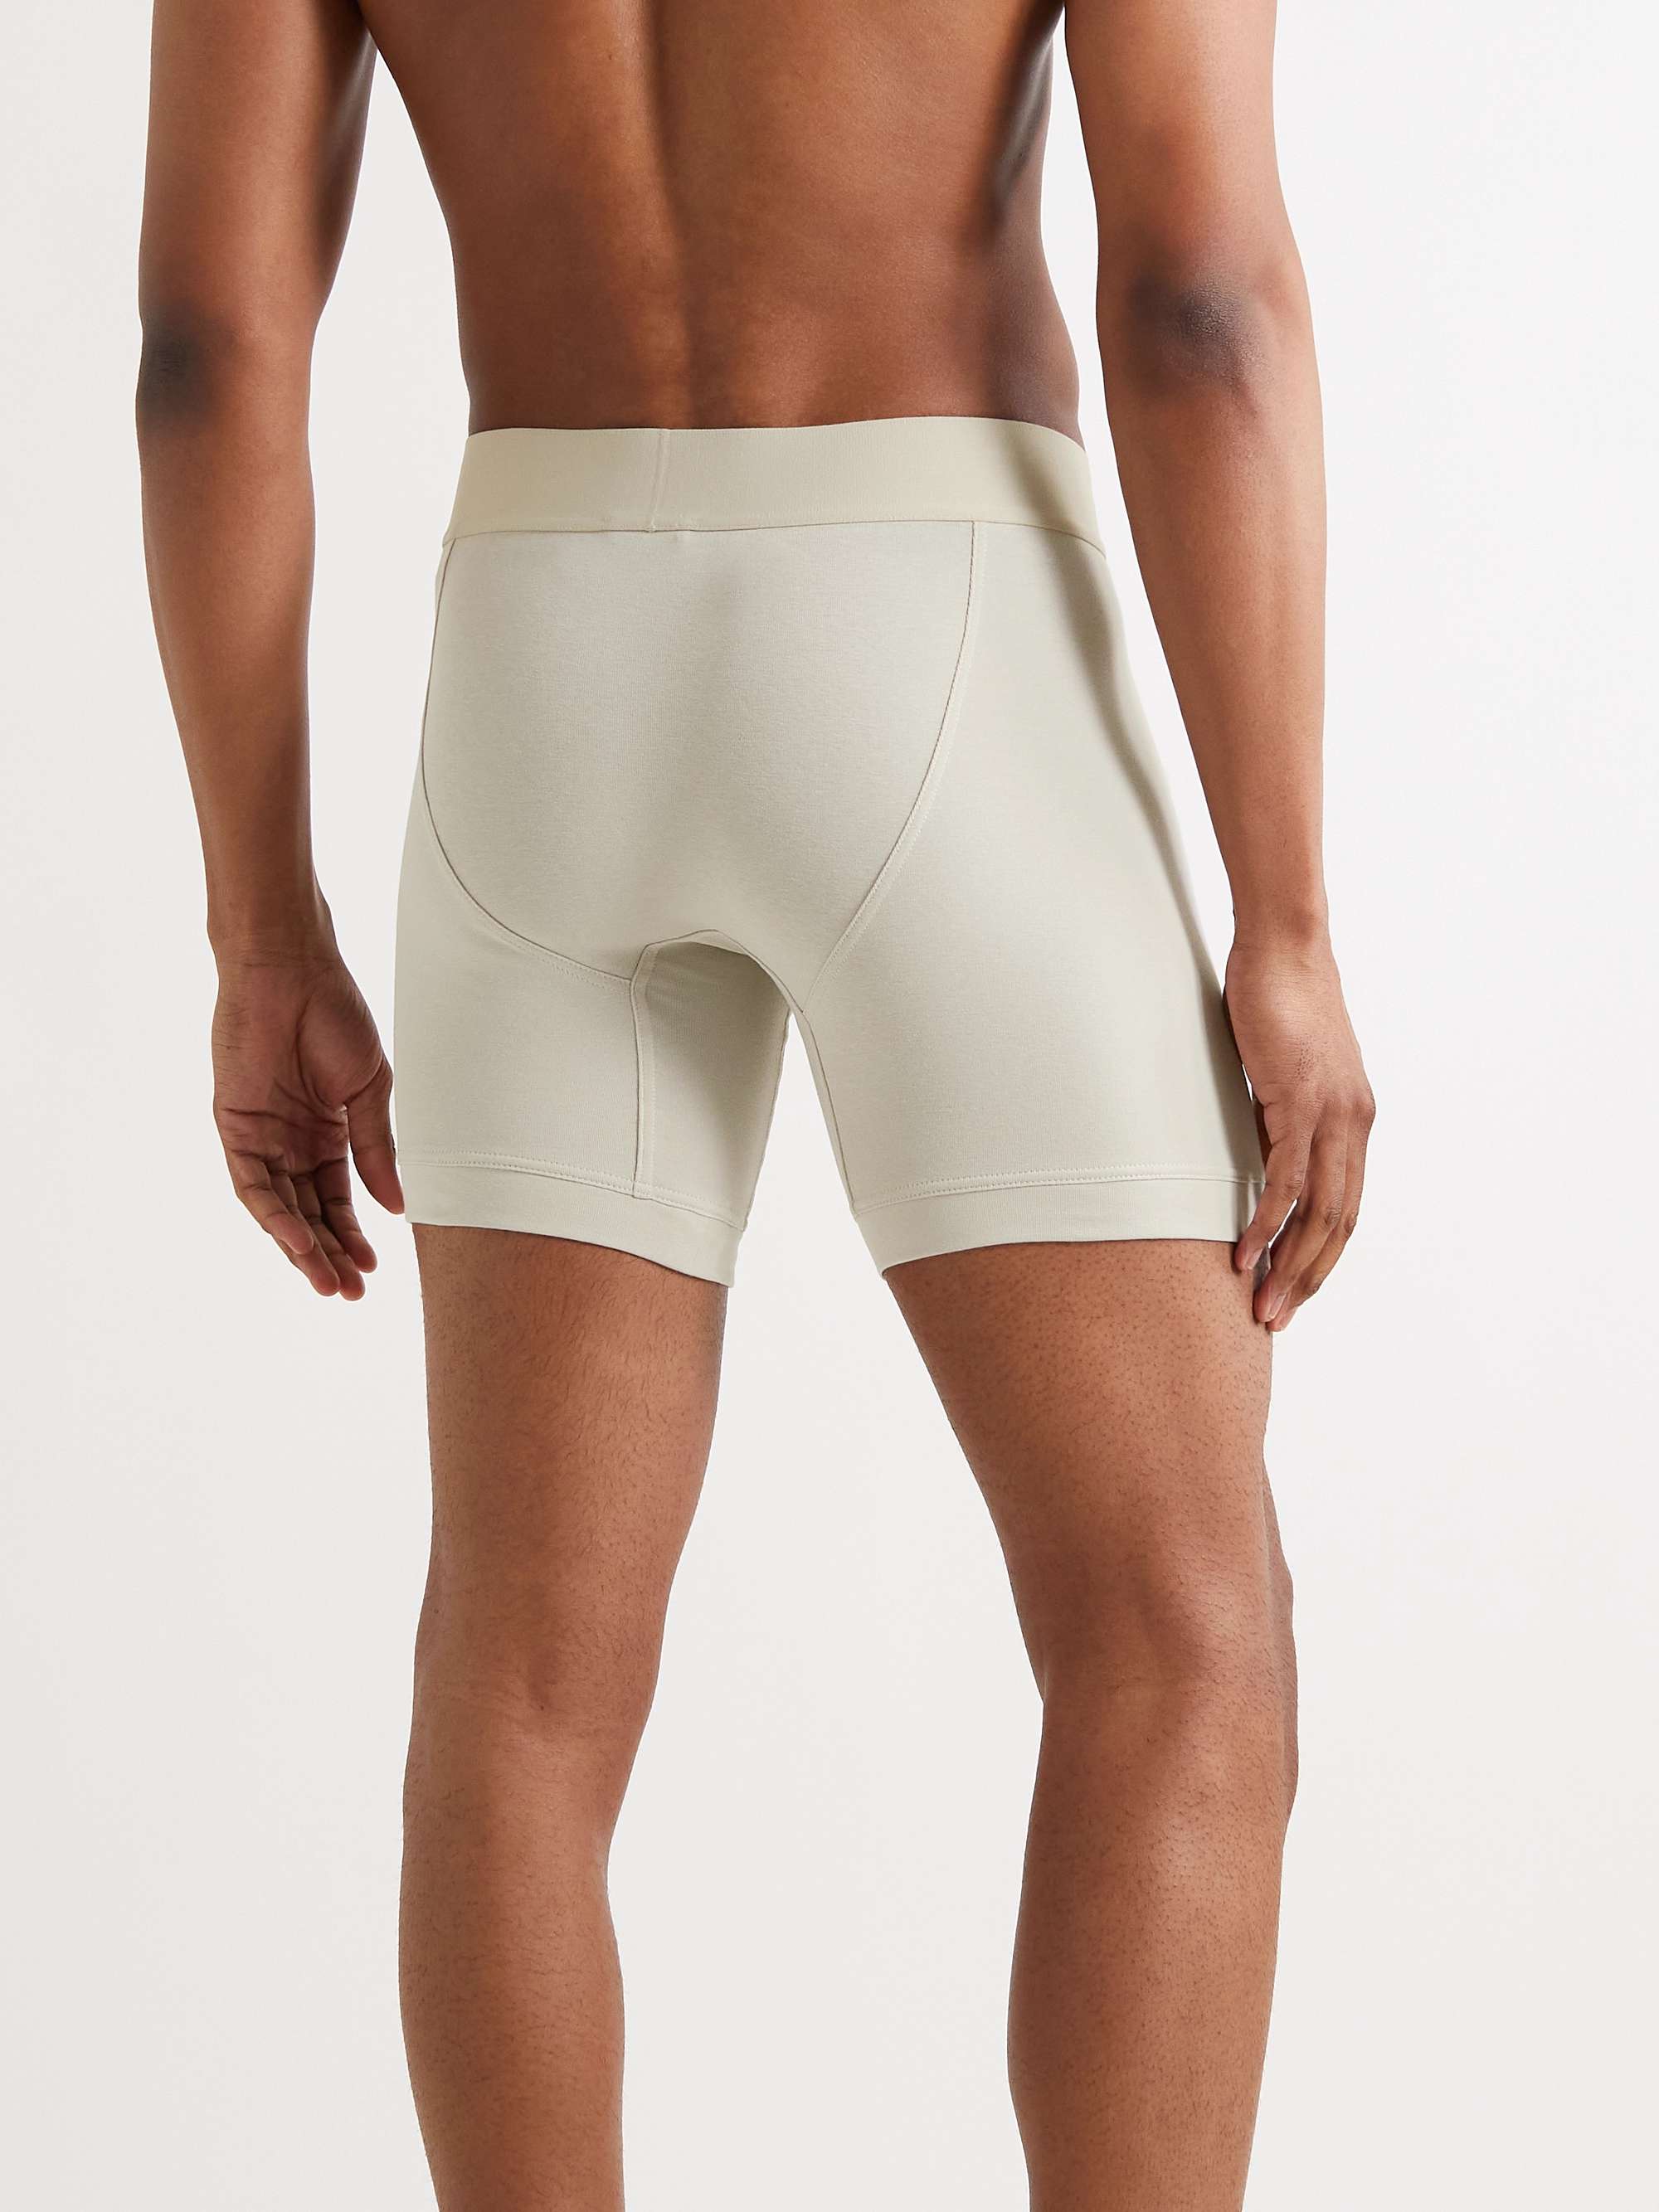 FEAR OF GOD Two-Pack Stretch-Cotton Jersey Boxer Briefs